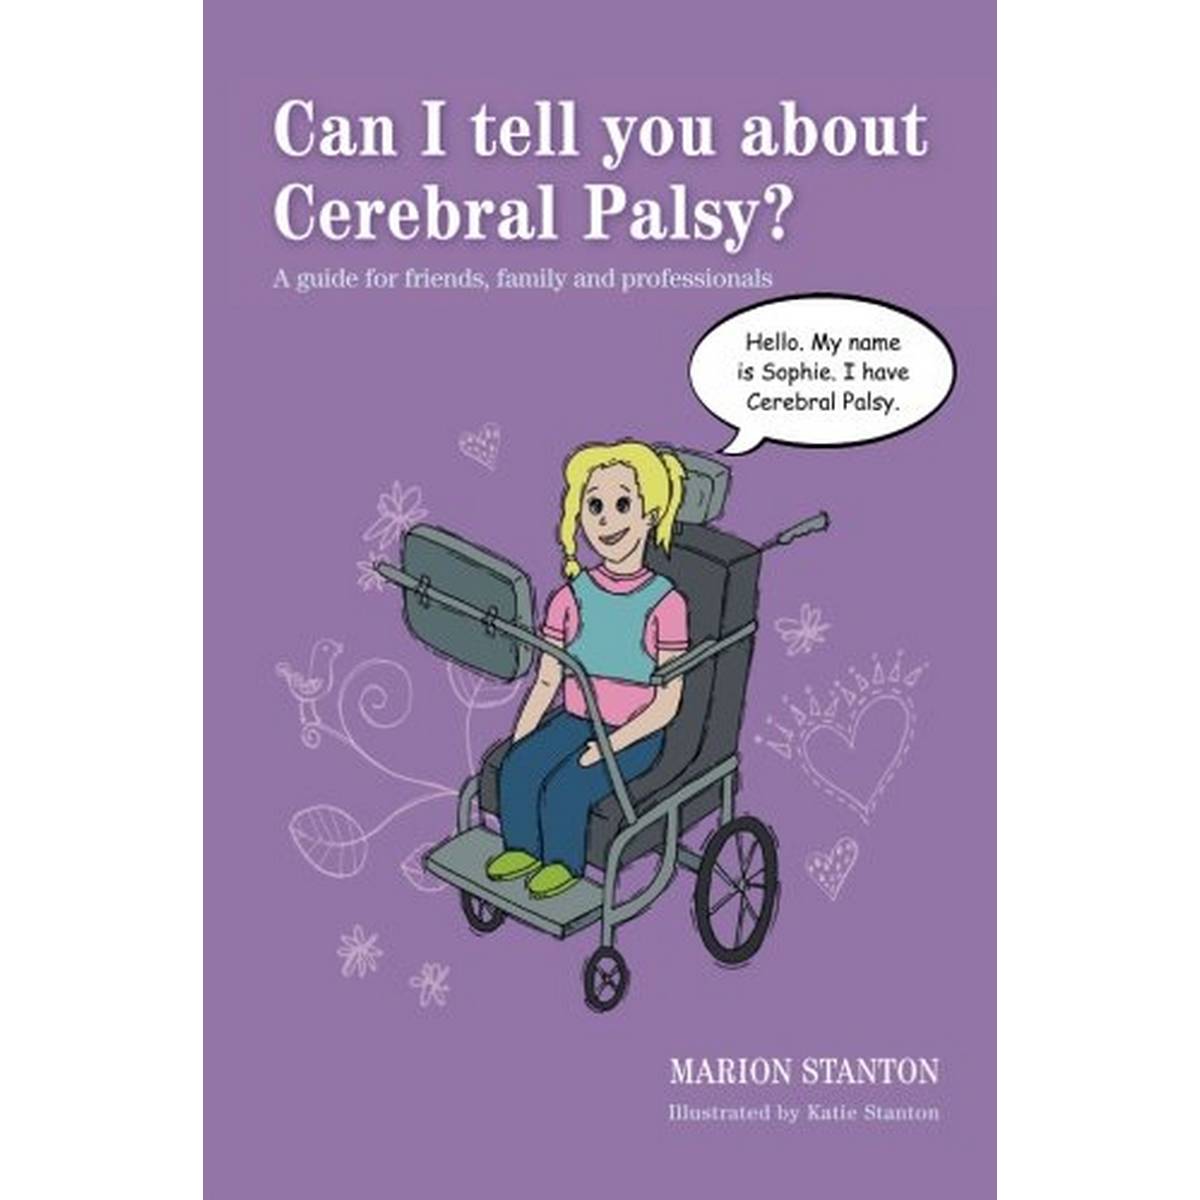 Can I Tell You about Cerebral Palsy?